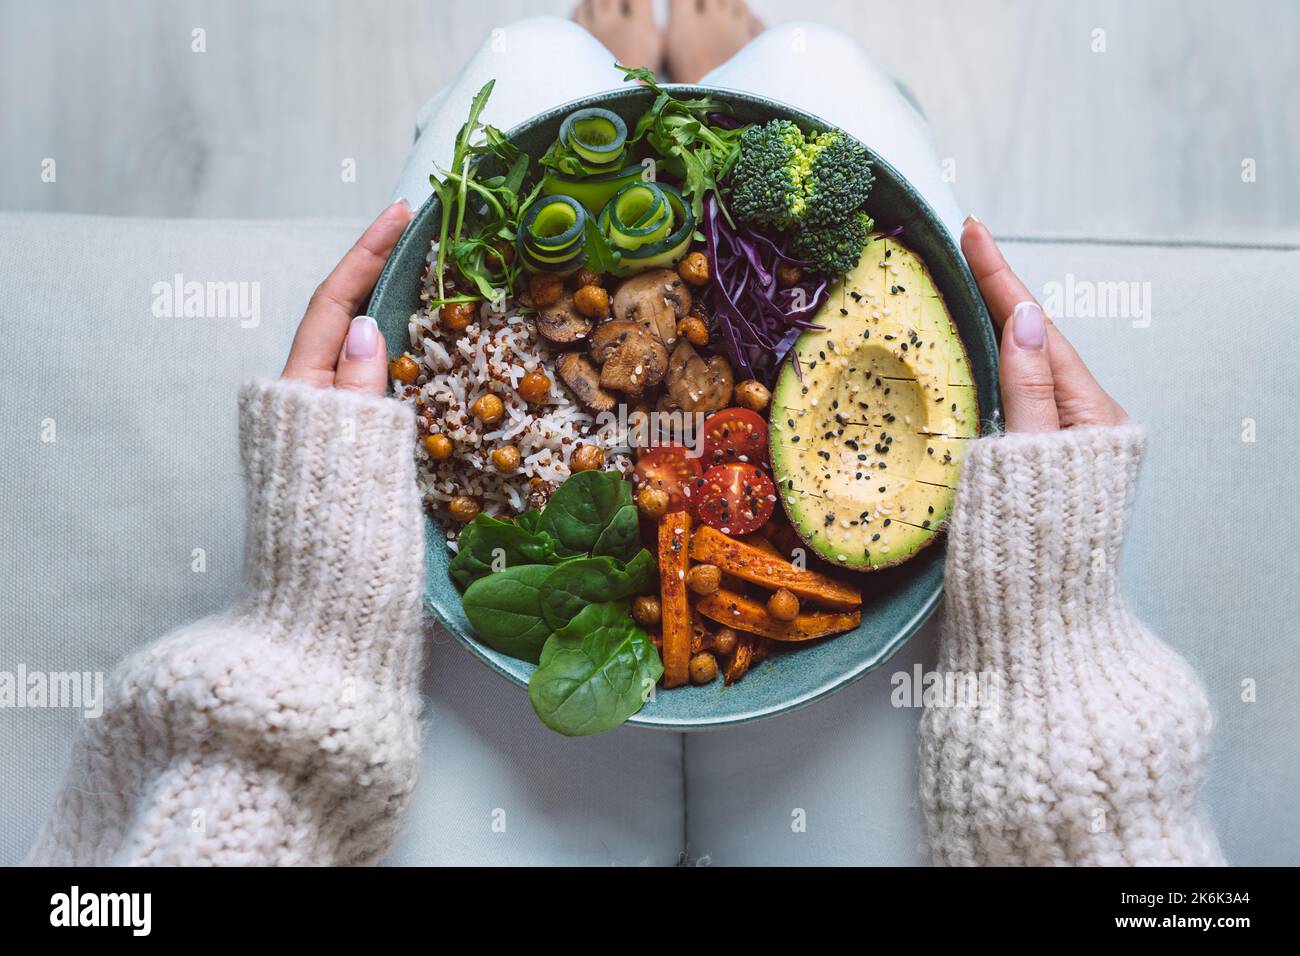 Healthy eating. Plate with vegan or vegetarian food in woman hands. Healthy plant based diet. Healthy dinner. Buddha bowl with fresh vegetables Stock Photo